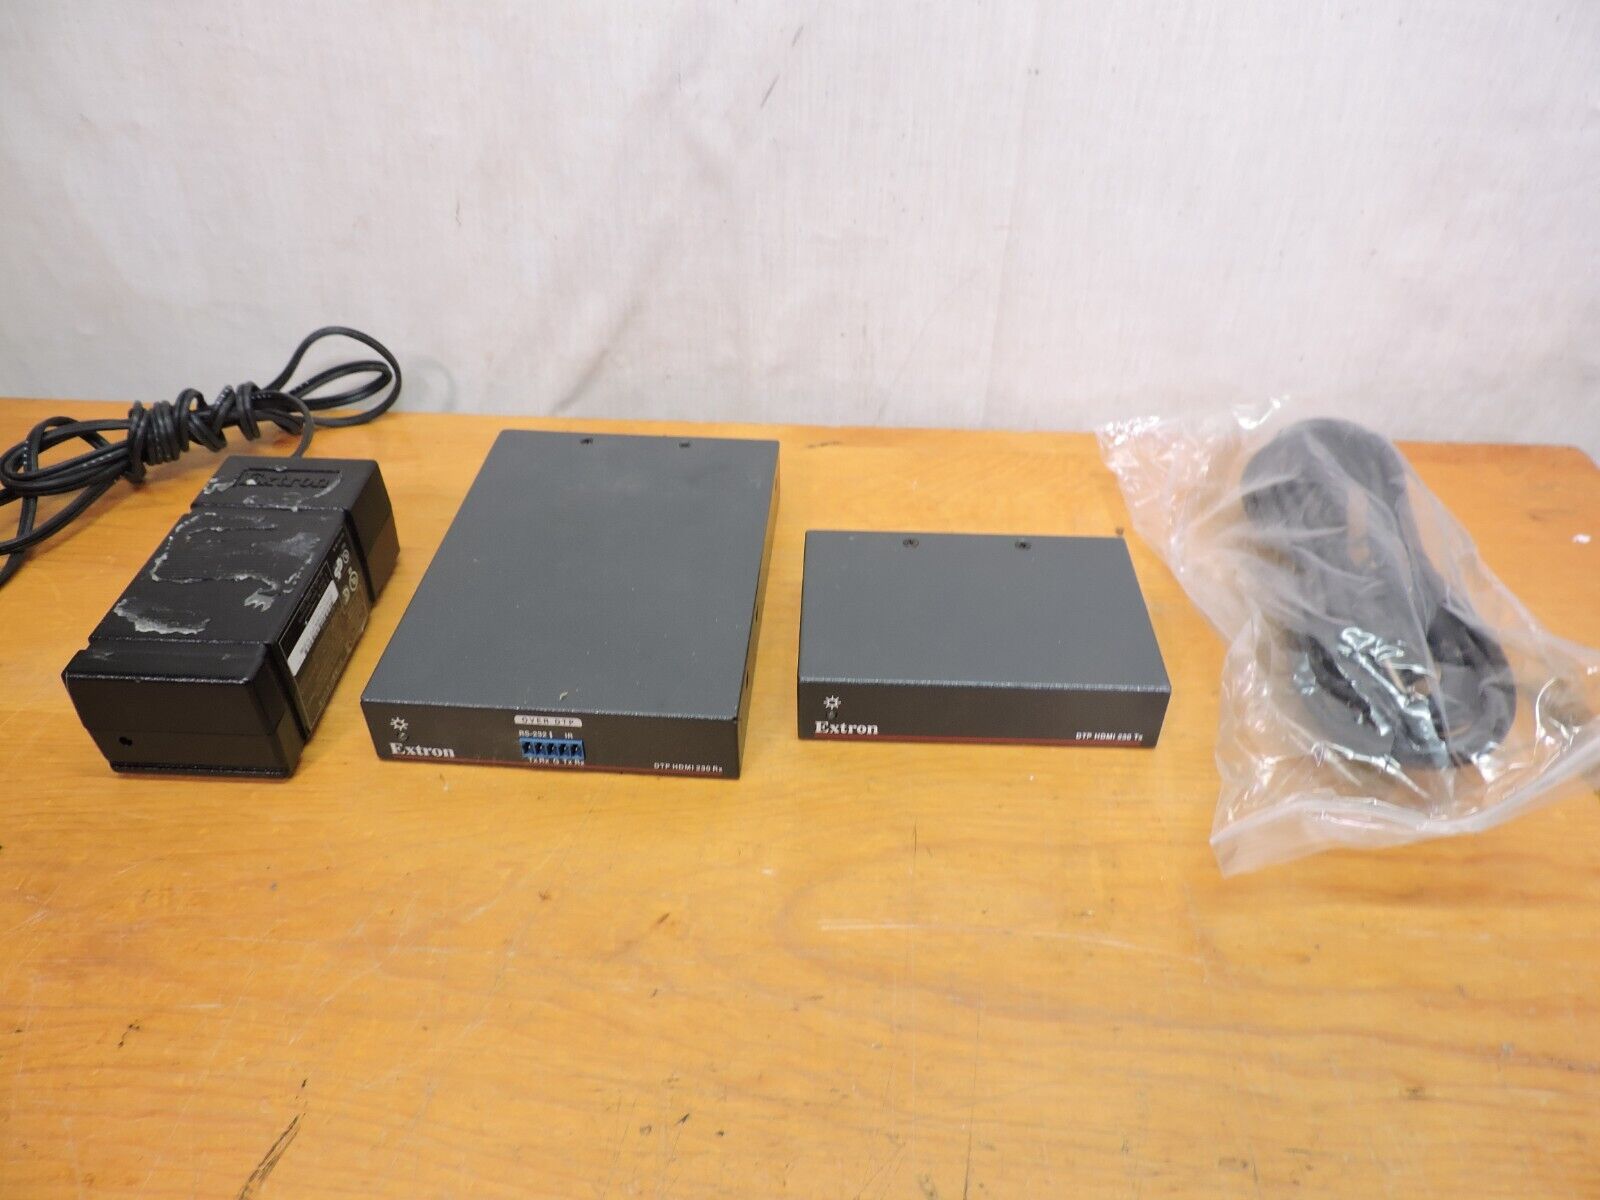 Extron DTP HDMI 230 TX and RX with power supply. Transmitter/Receiver.